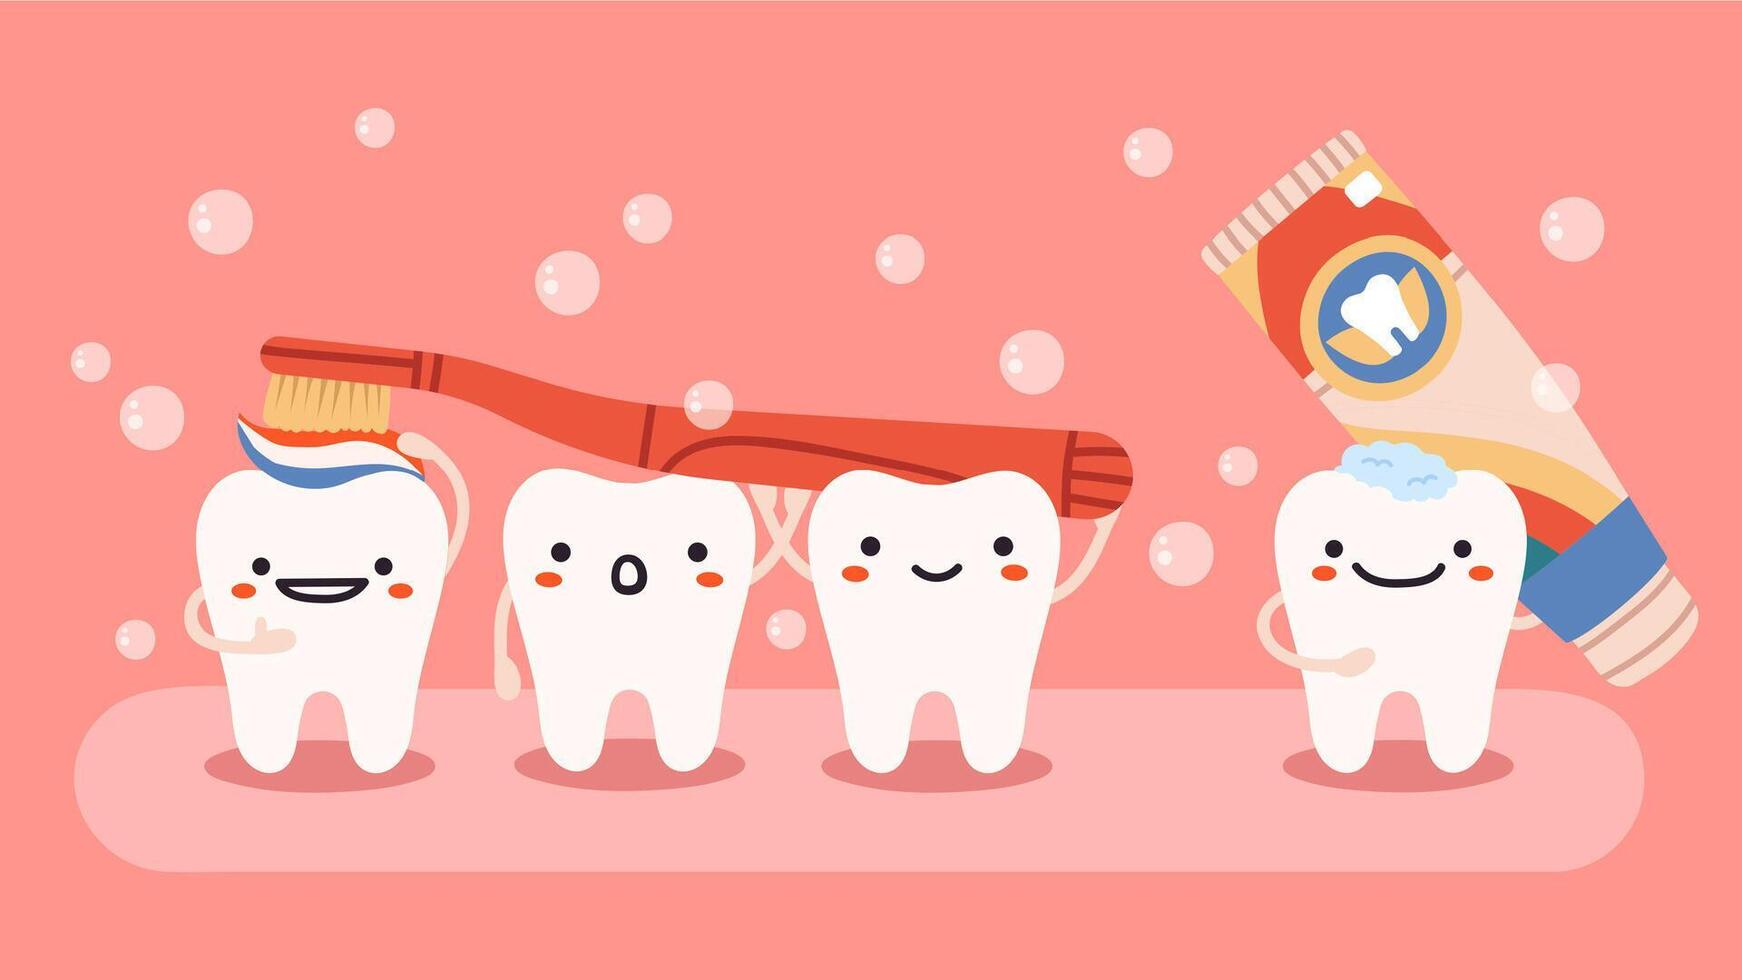 Cute tooth hygiene. Smiling, happy teeth mascots with toothbrush and toothpaste, oral dental healthcare isolated vector illustration